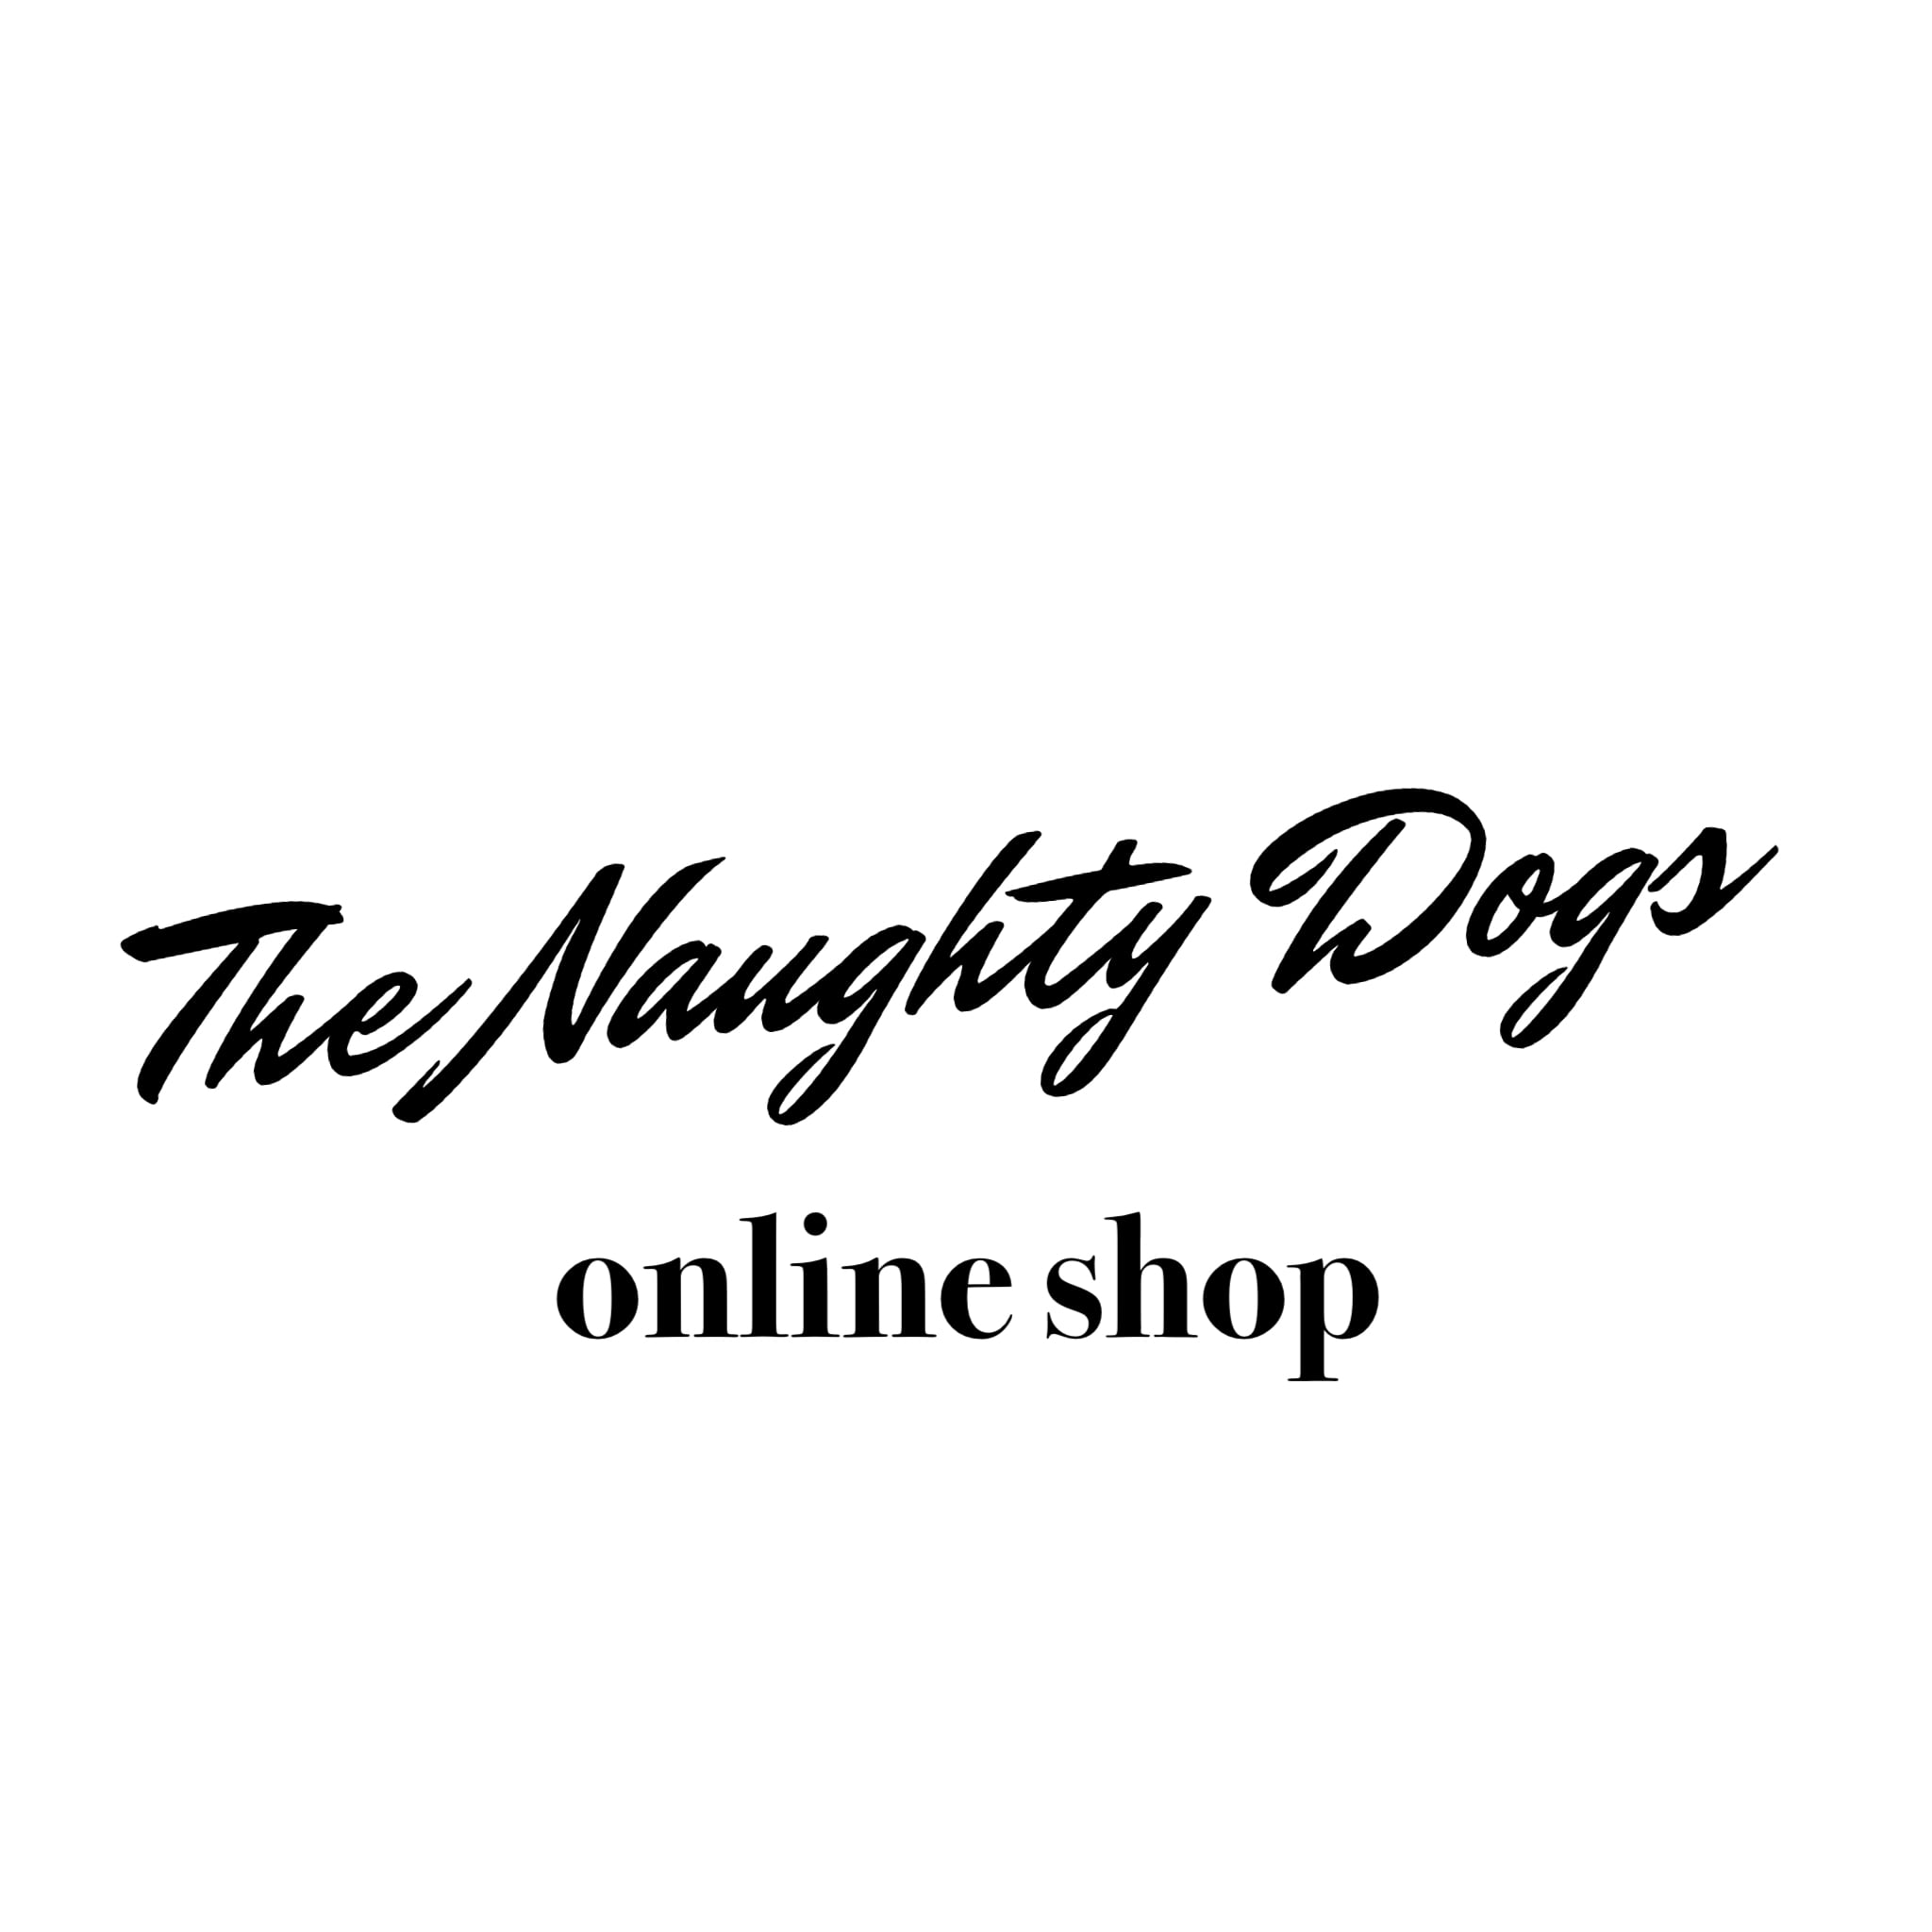 The Naughty Dogs online shop